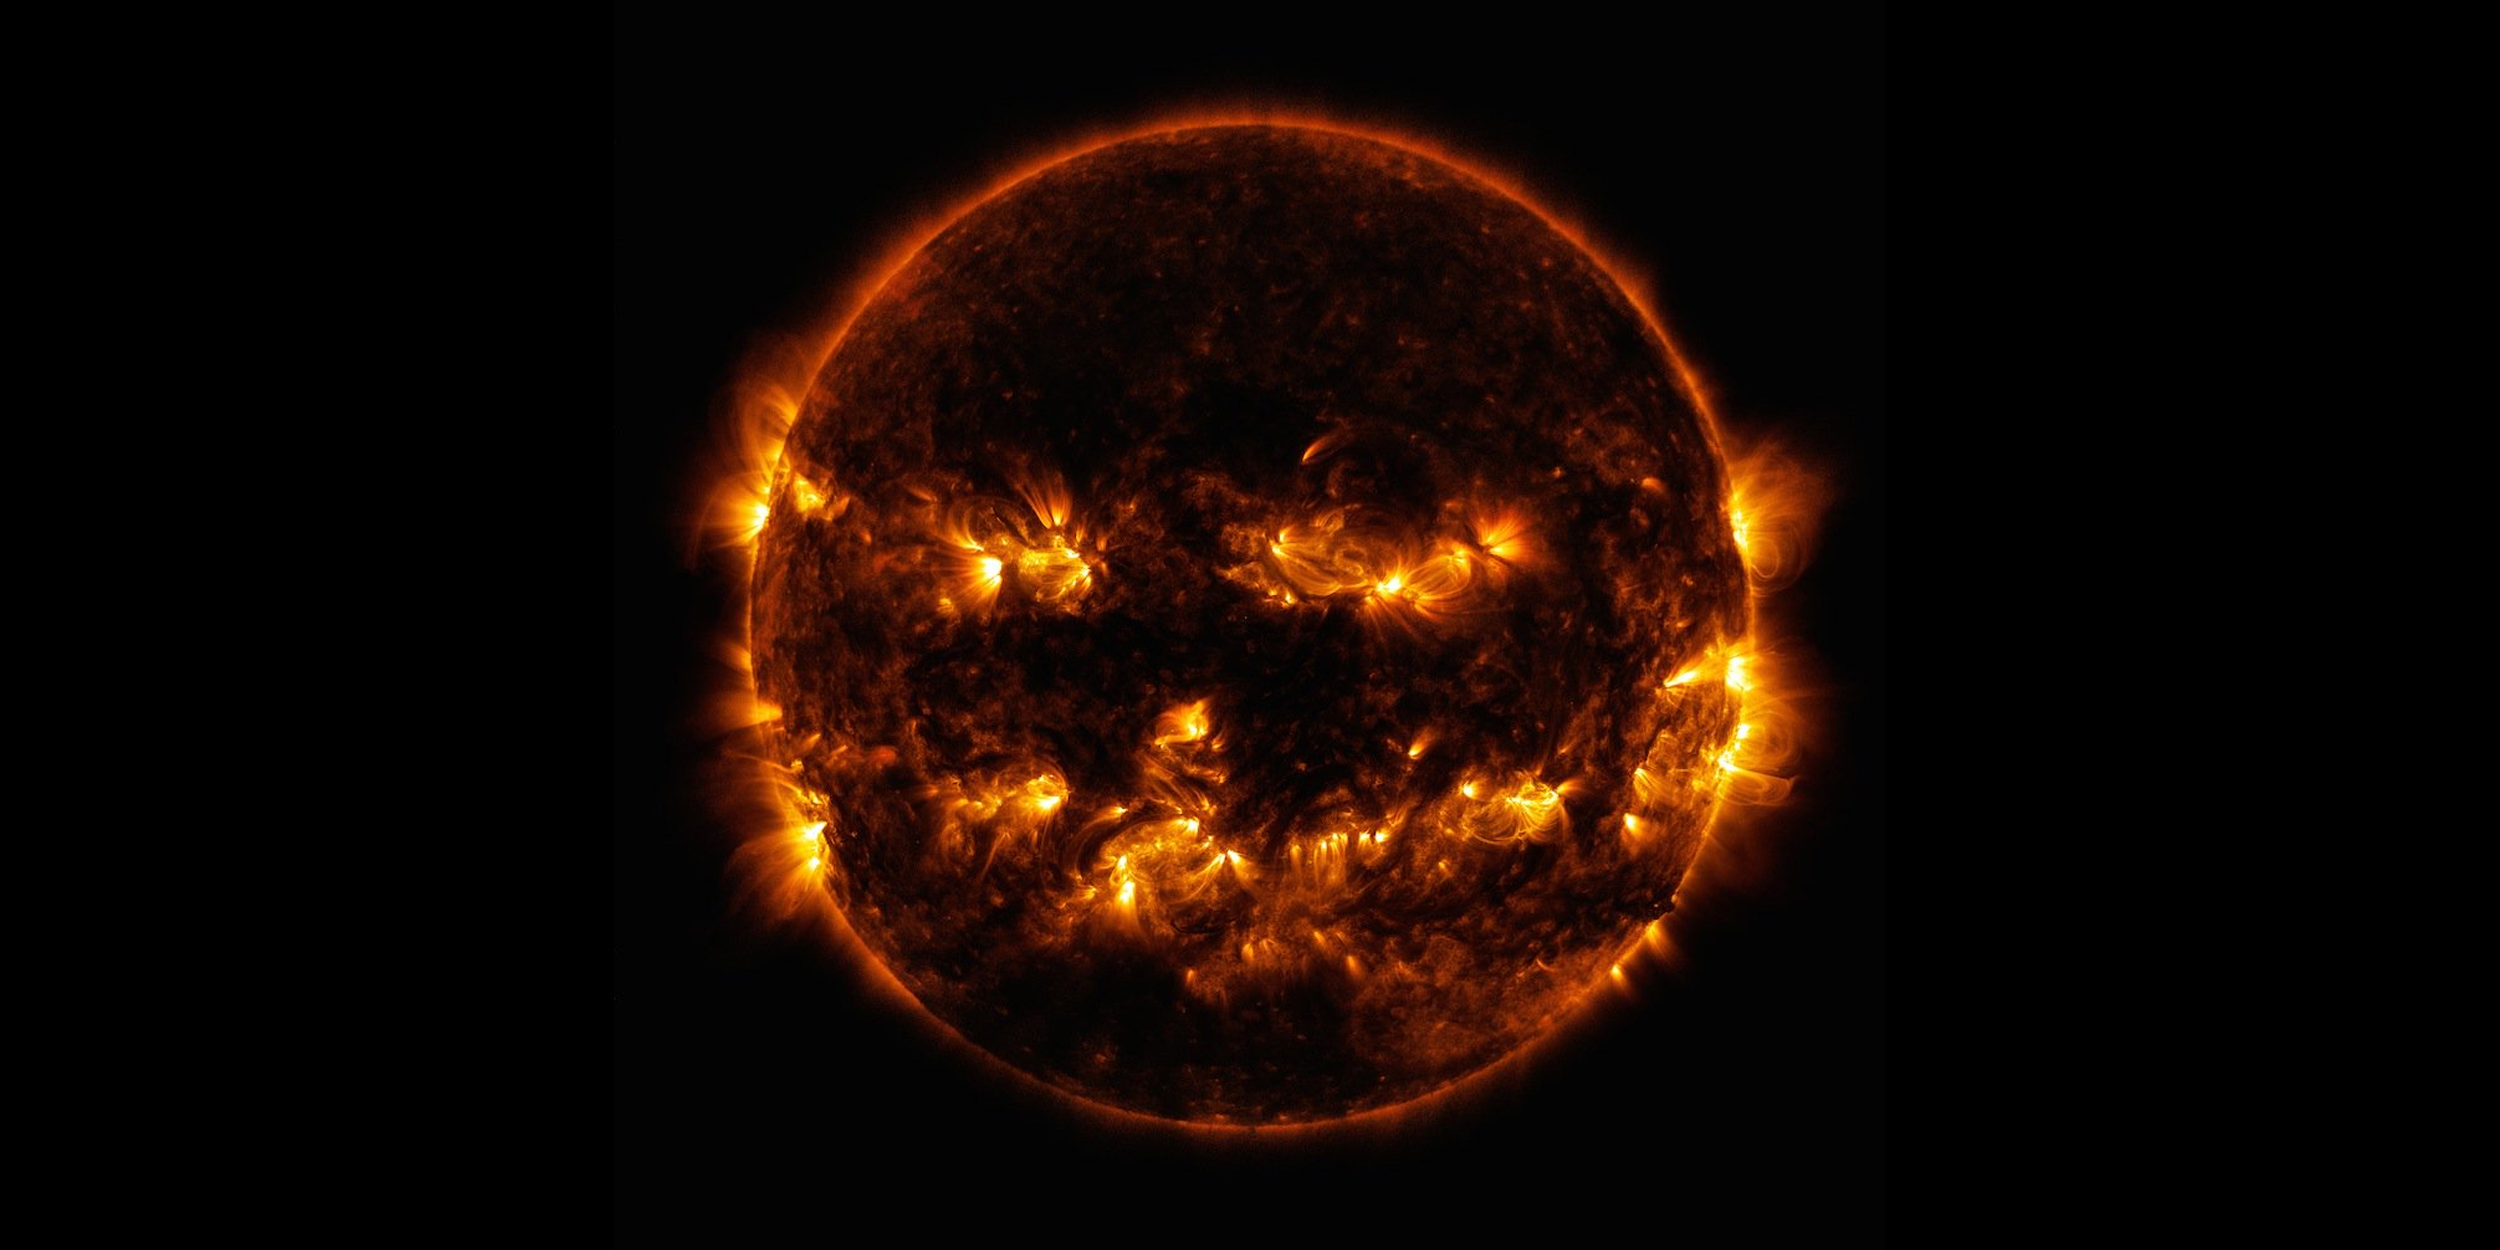 NASA shares spooky space photo just in time for Halloween